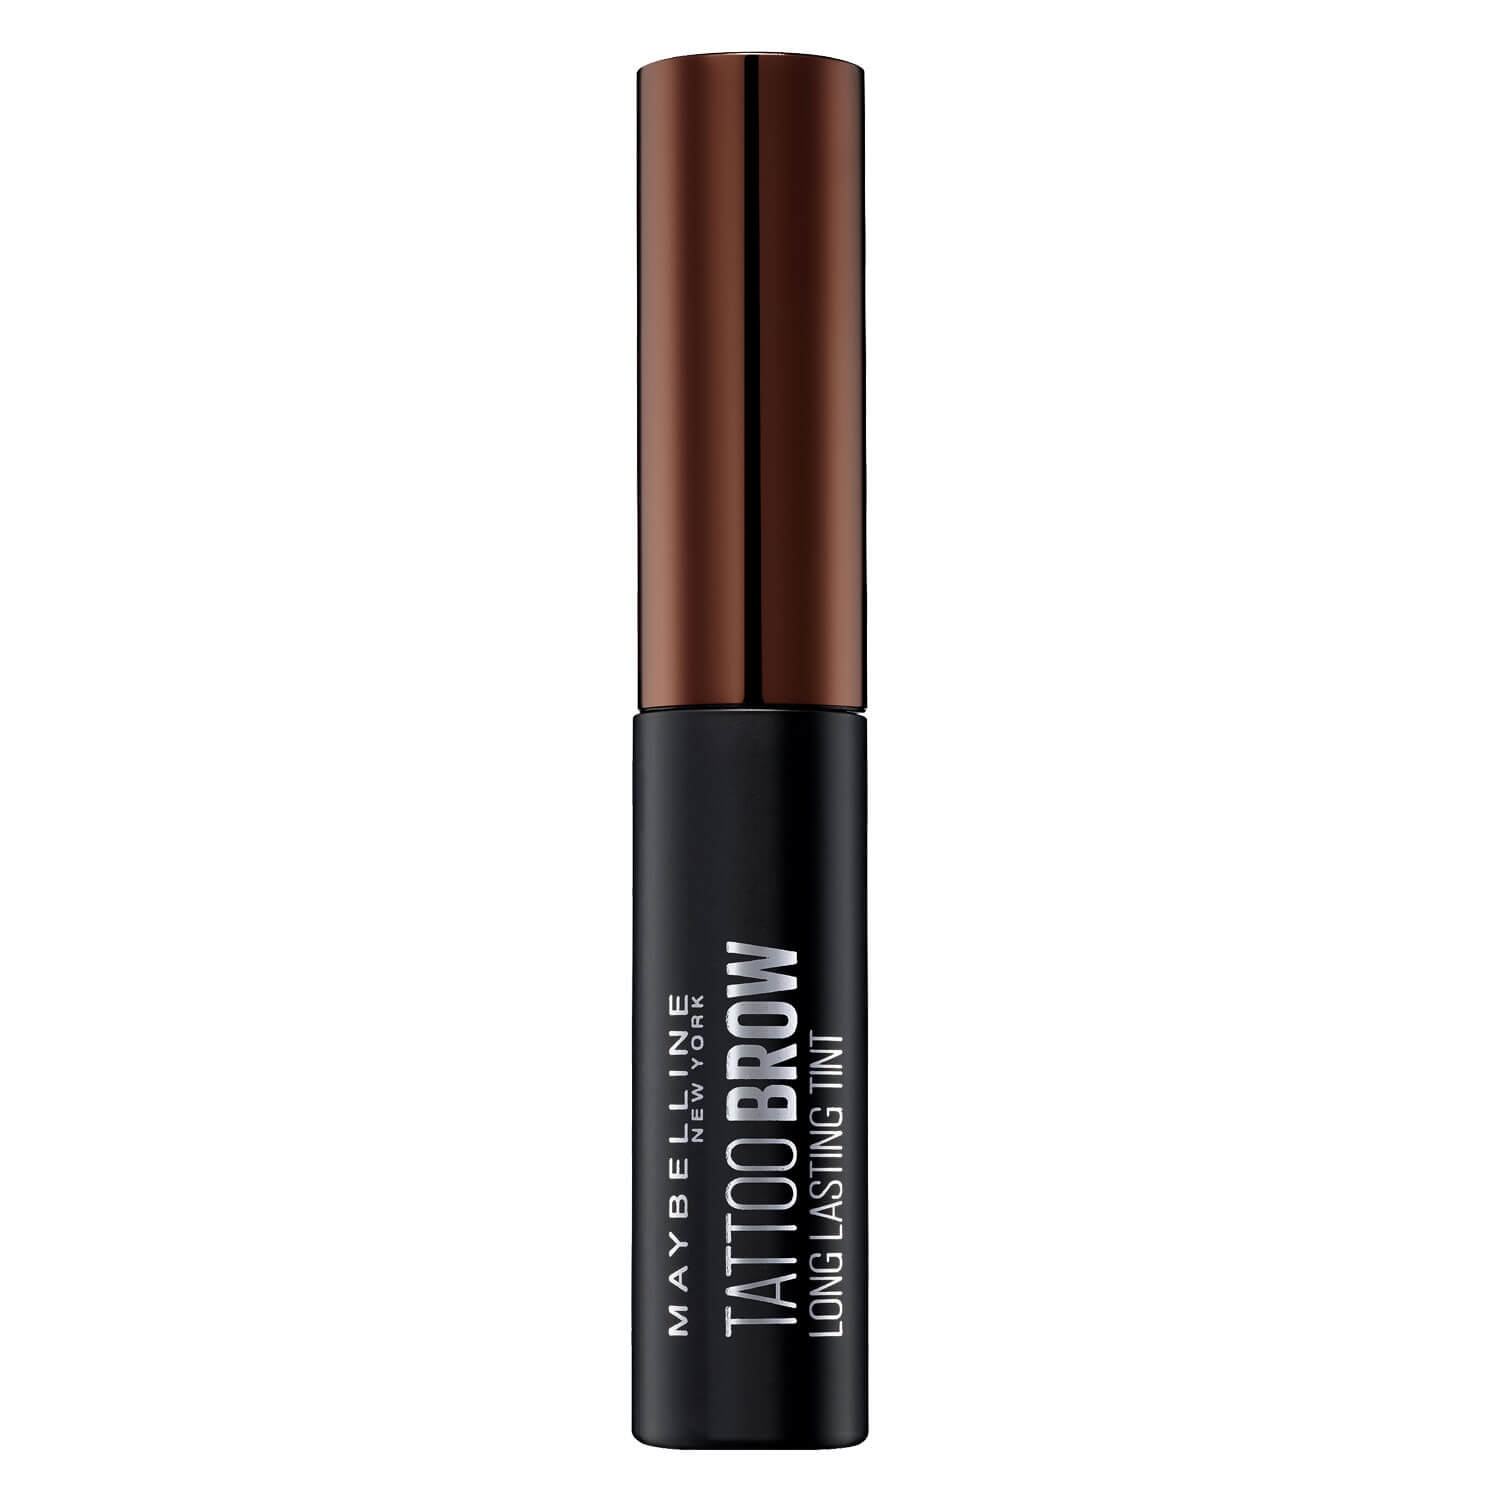 Product image from Maybelline NY Brows - Tattoo Brow Gel 3 Dark Brown